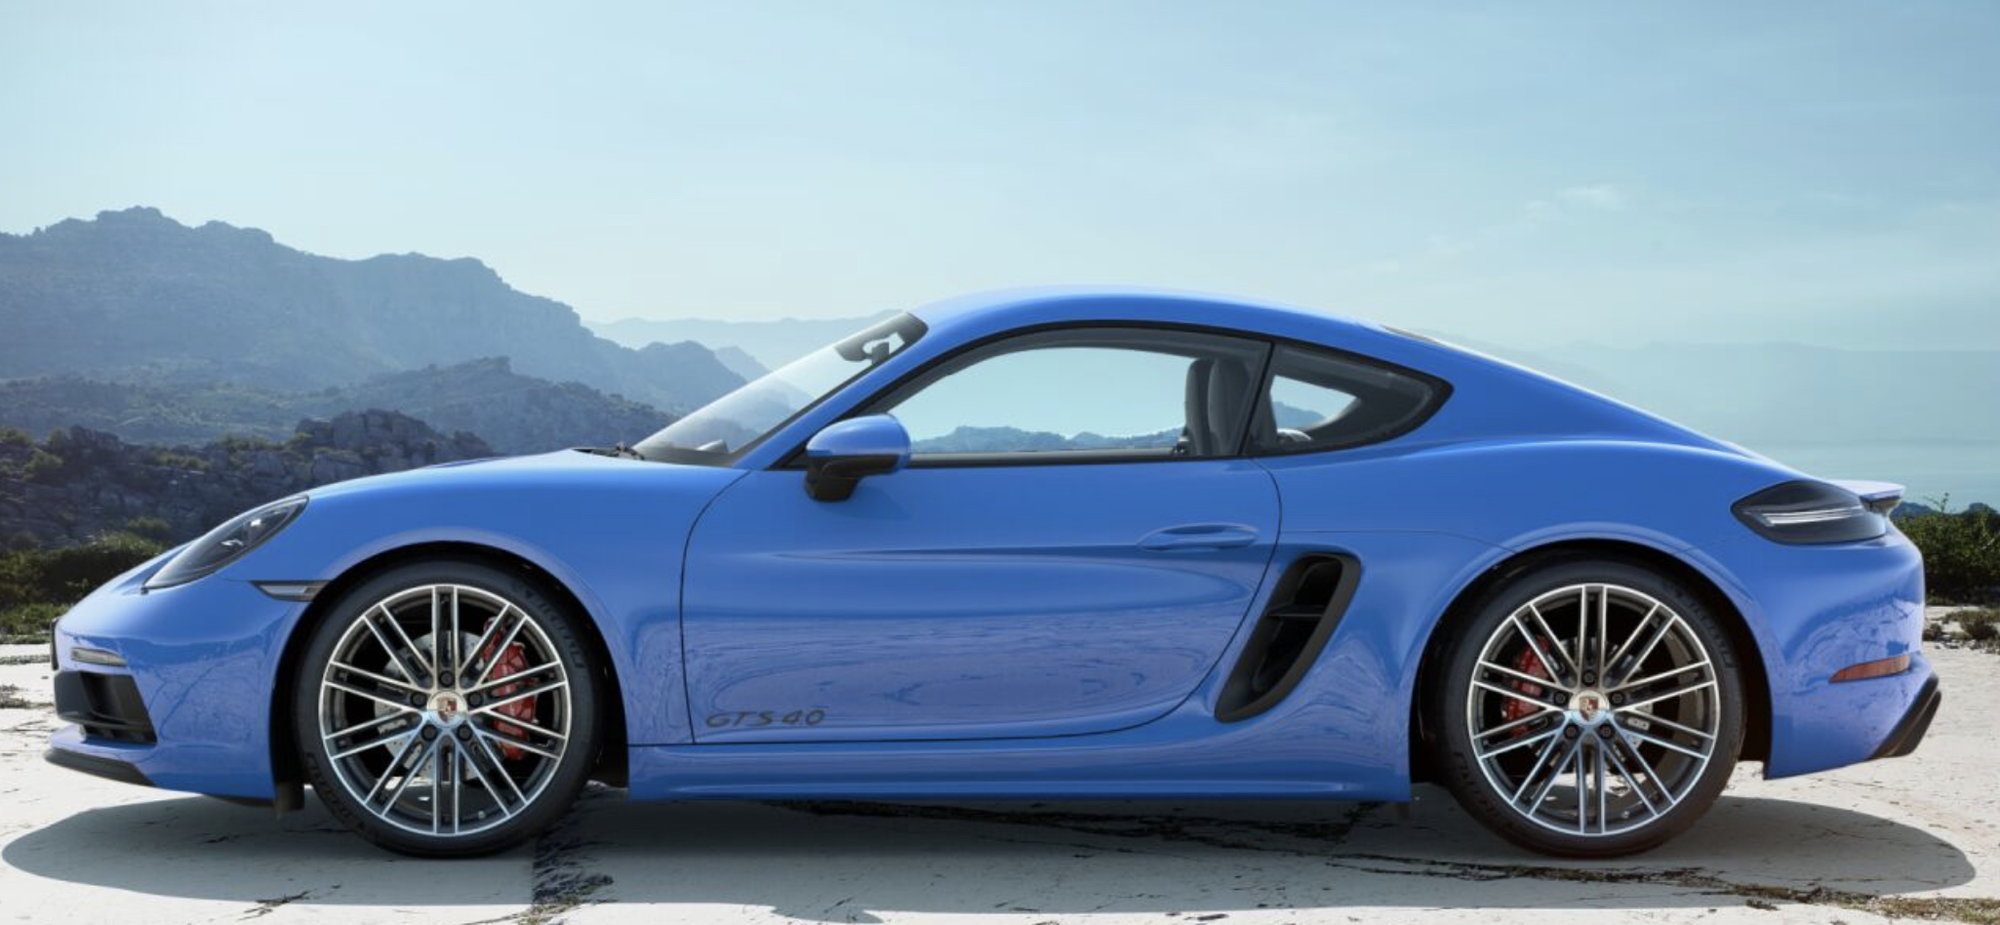 BRAND NEW! 2023 Cayman GTS 4.0 Spec fully changeable until 1/2023